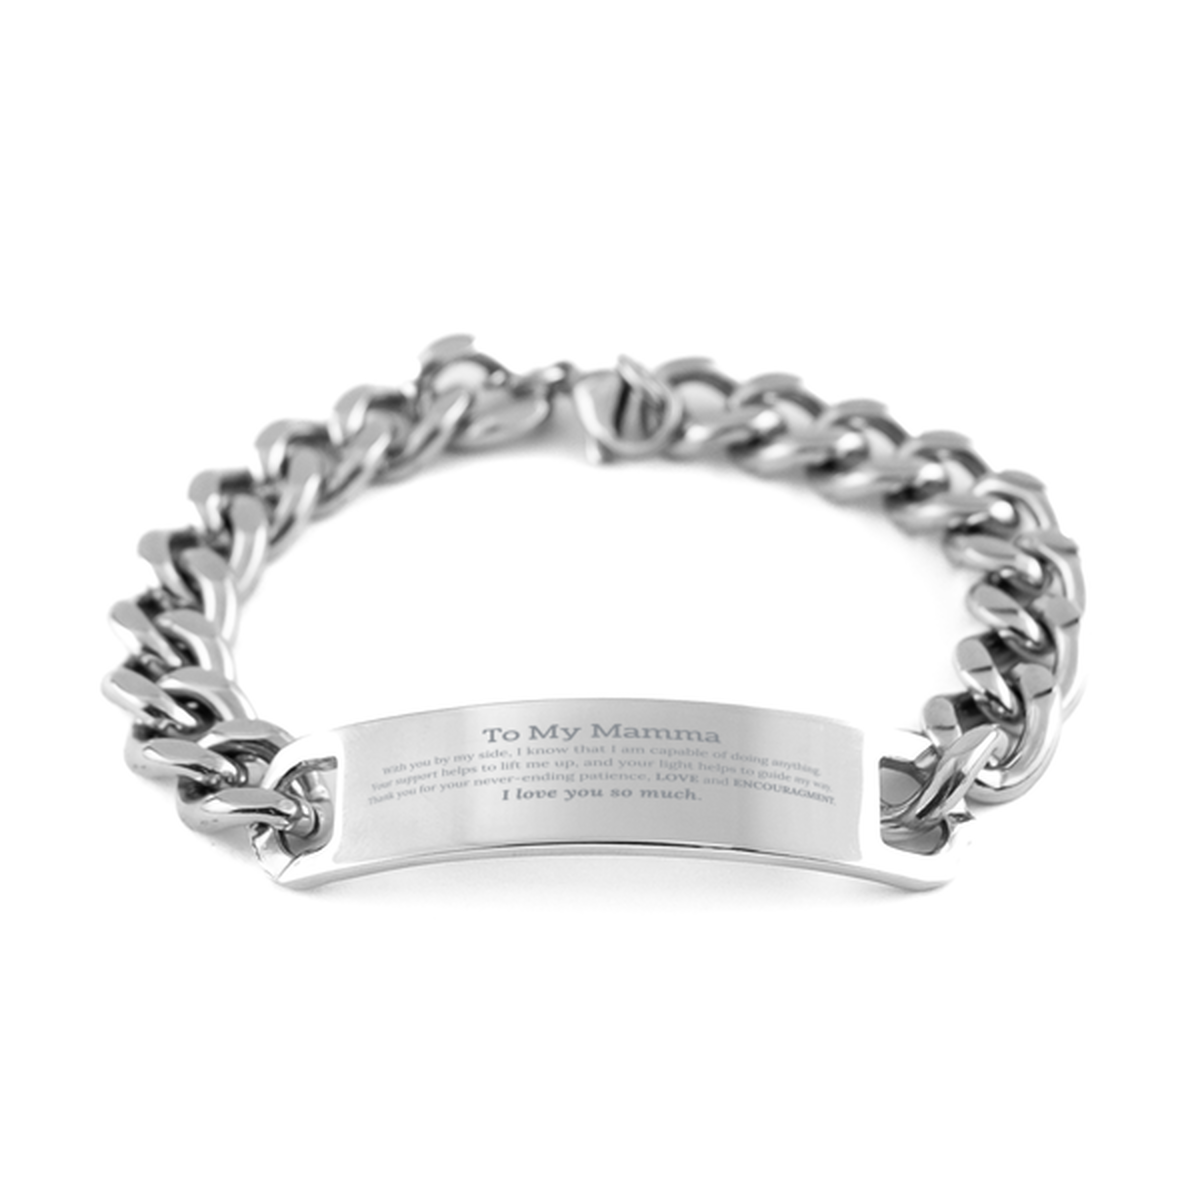 Appreciation Mamma Cuban Chain Stainless Steel Bracelet Gifts, To My Mamma Birthday Christmas Wedding Keepsake Gifts for Mamma With you by my side, I know that I am capable of doing anything. I love you so much